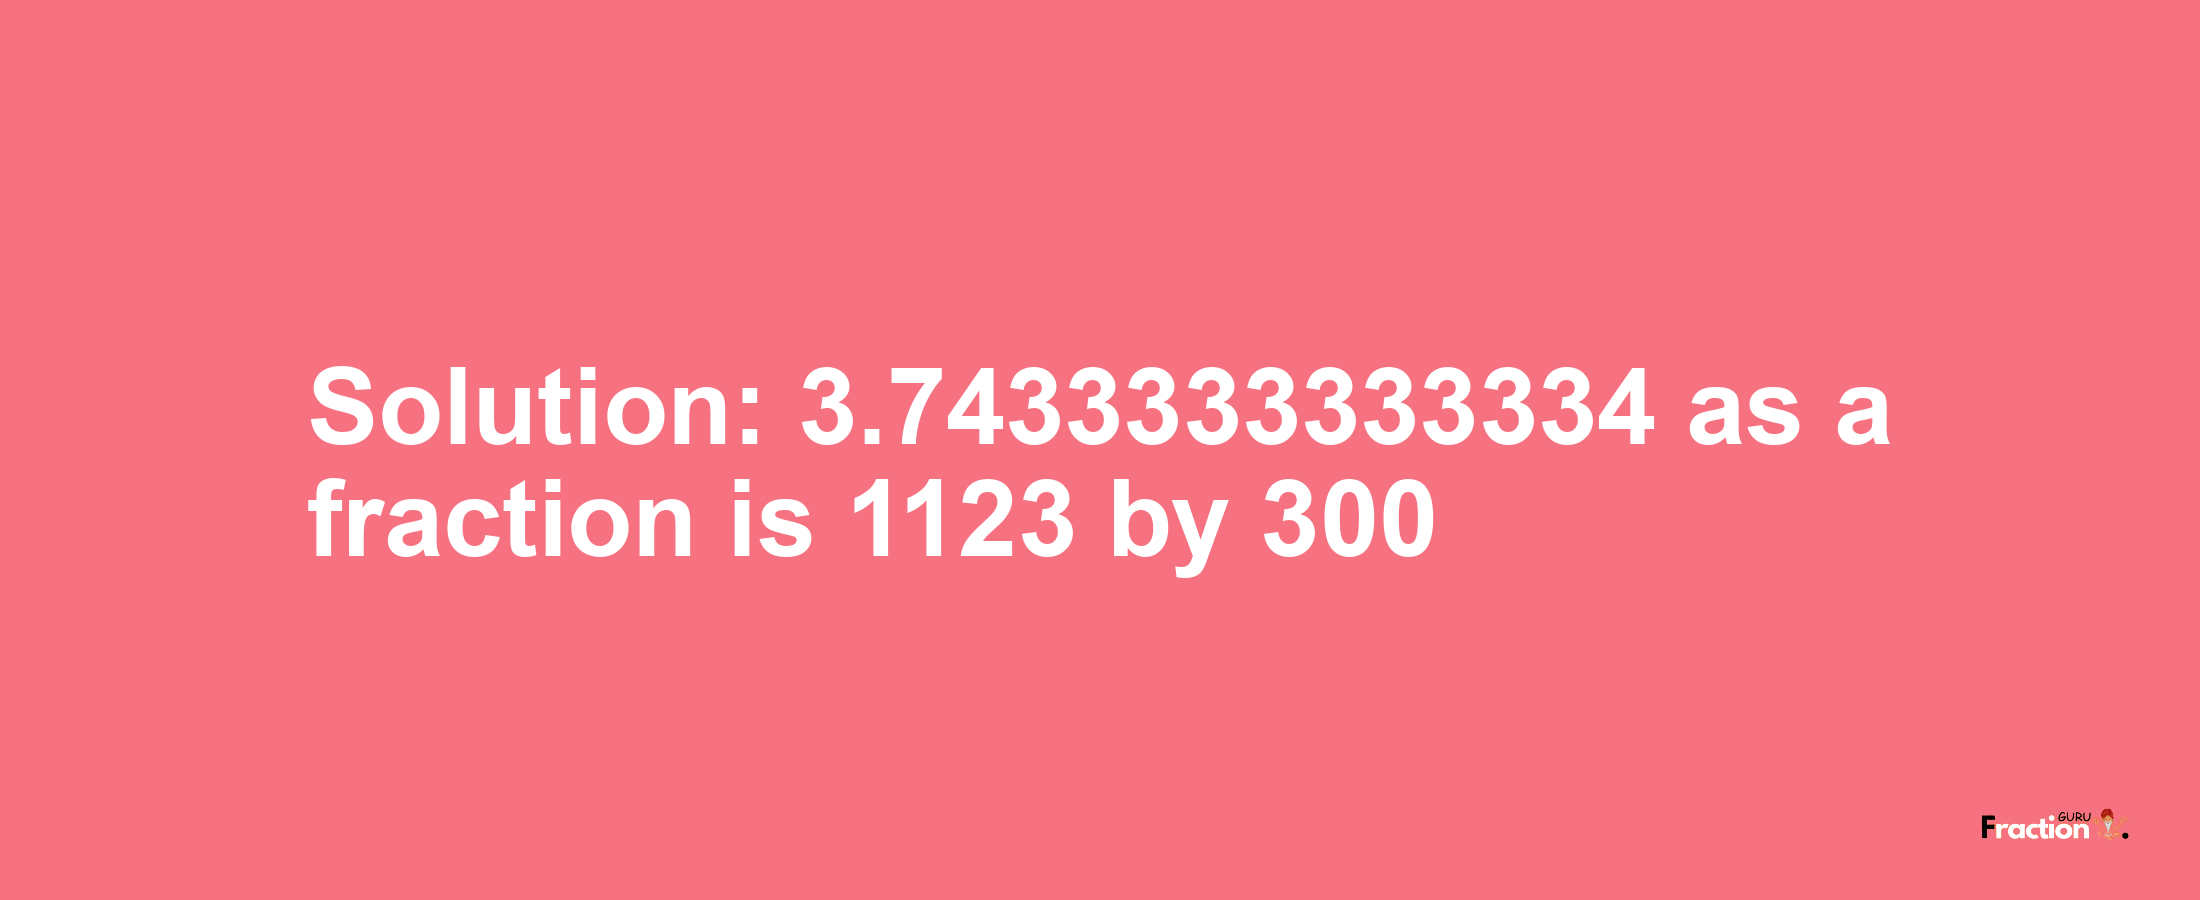 Solution:3.7433333333334 as a fraction is 1123/300